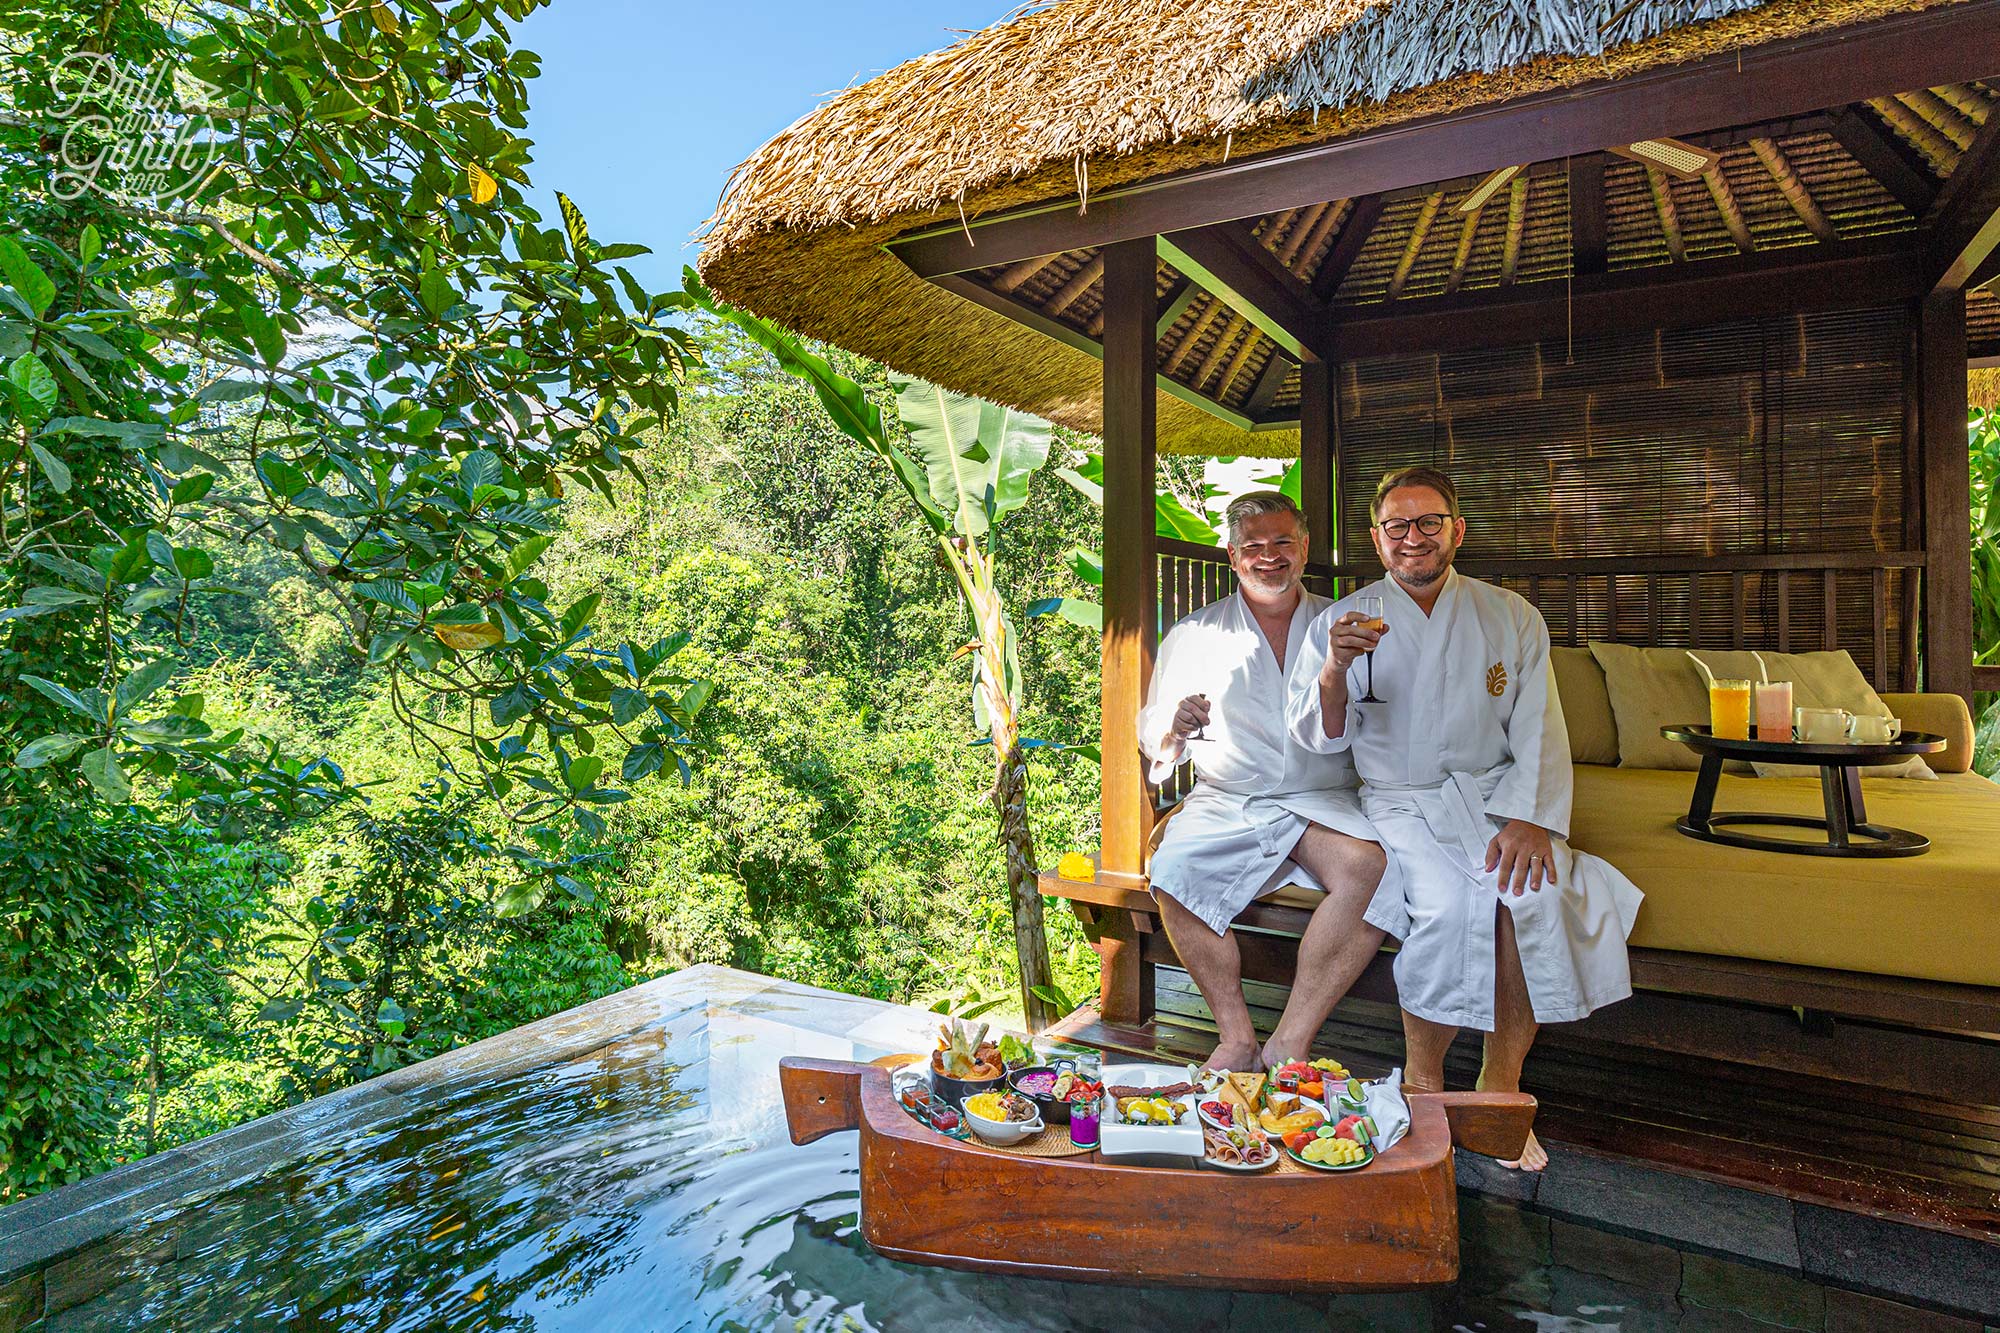 Our incredible floating breakfast at The Hanging Gardens of Bali in Ubud